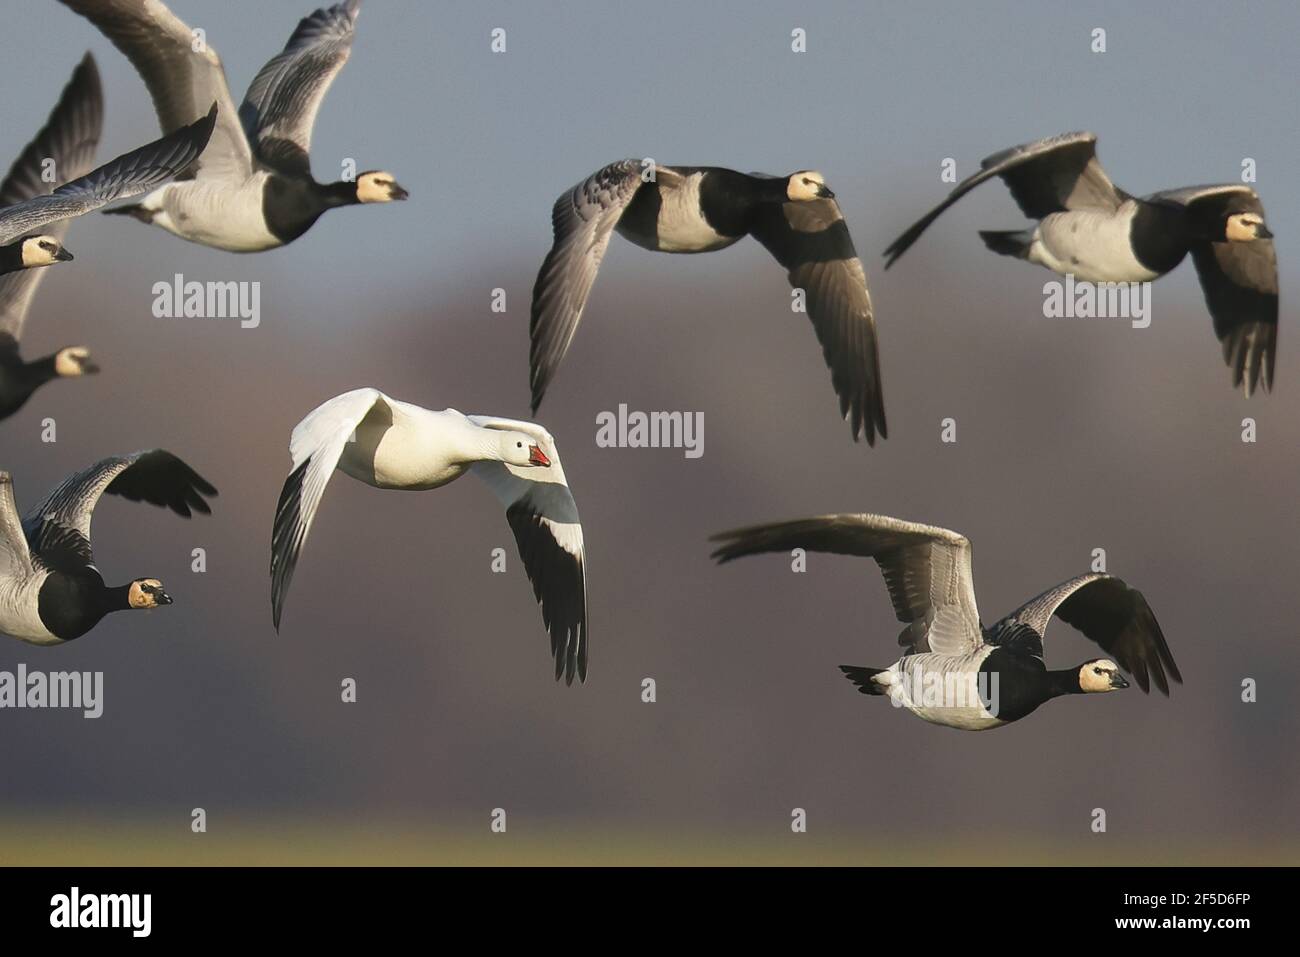 Ross's goose (Anser rossii, Chen rossii), in flight with a group of barnacle geese, Netherlands, Gelderland, Arkemheen Stock Photo